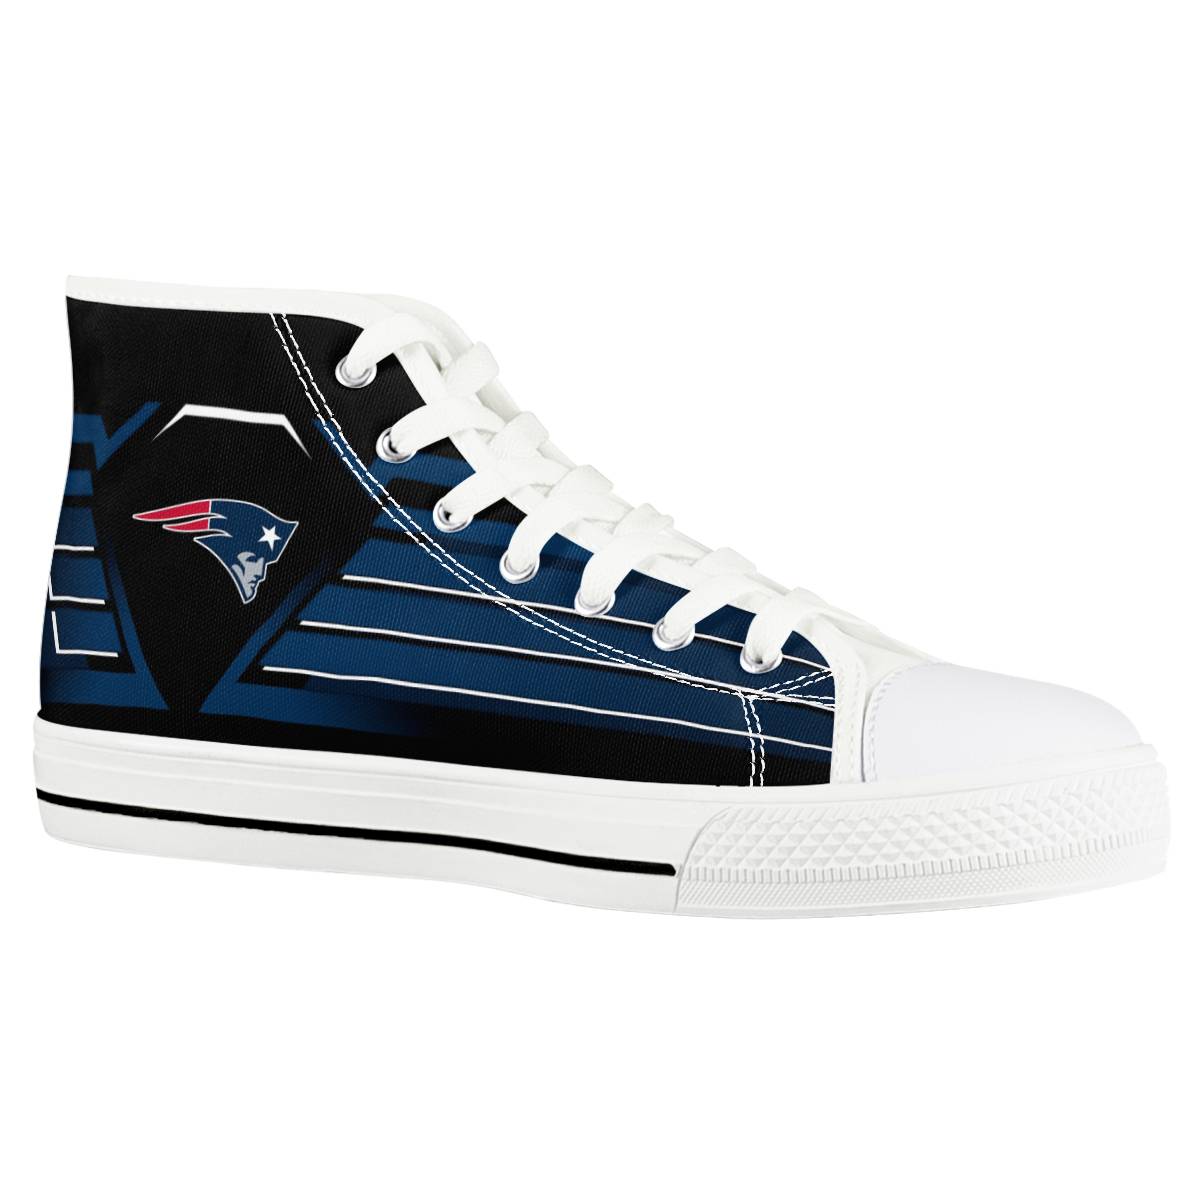 Women's New England Patriots High Top Canvas Sneakers 001